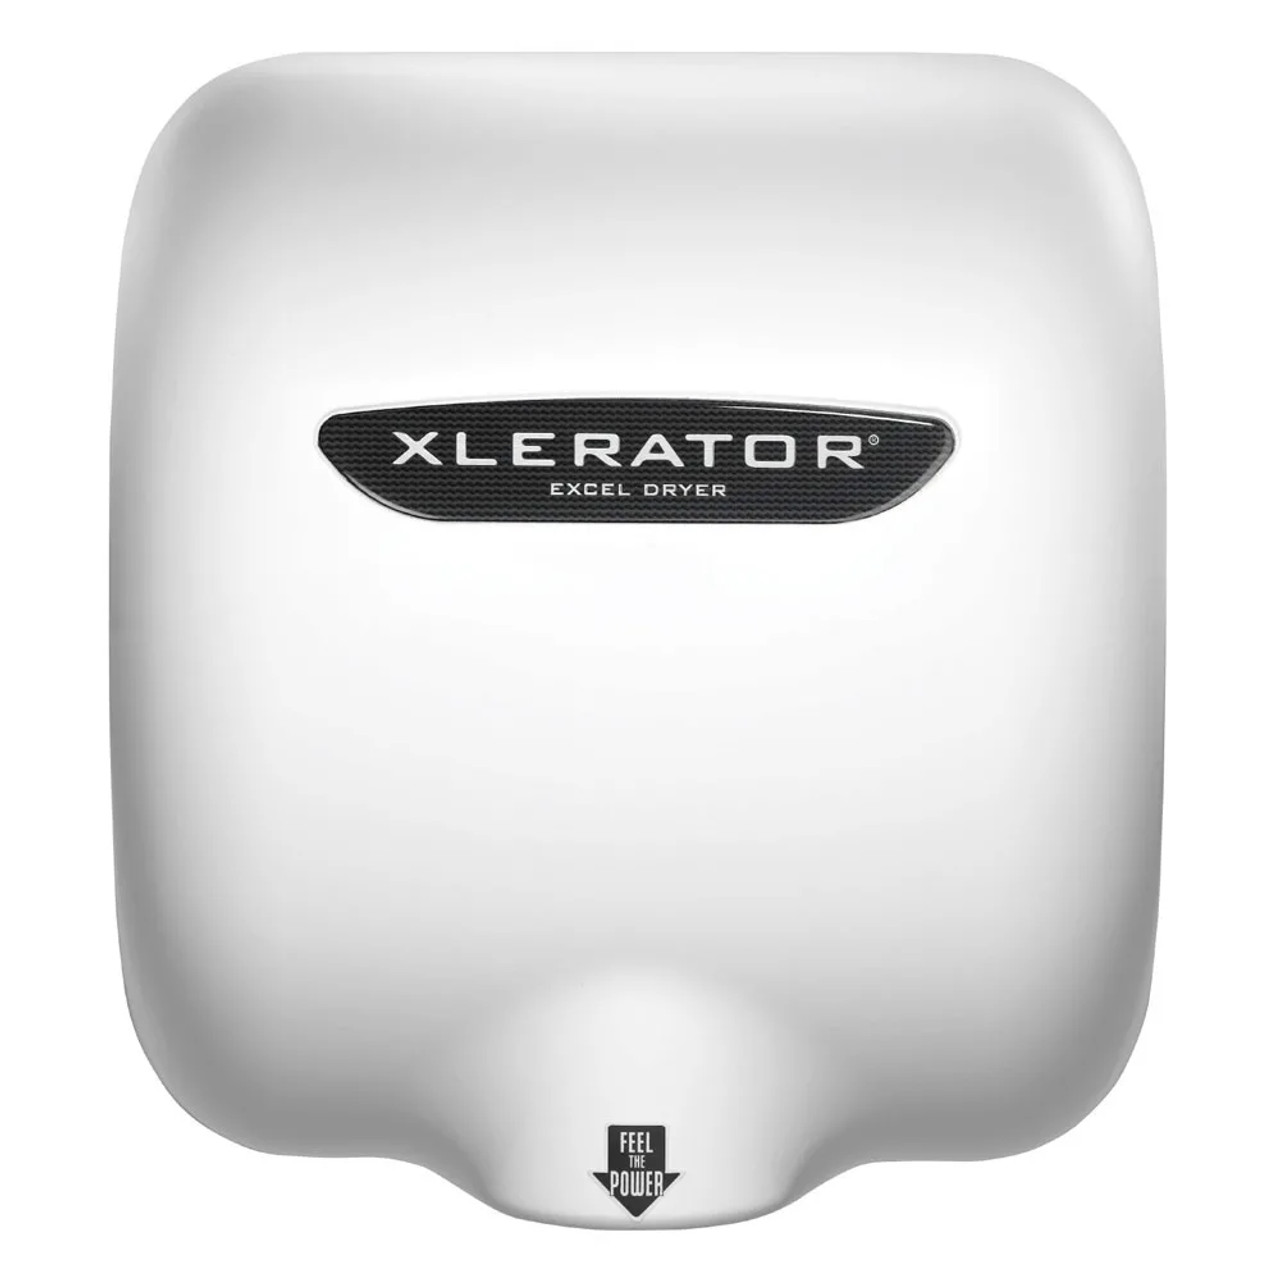 Excel Dryer Automatic Hand Dryer - 8 Second Dry Time, White, 110-120V - Chicken Pieces